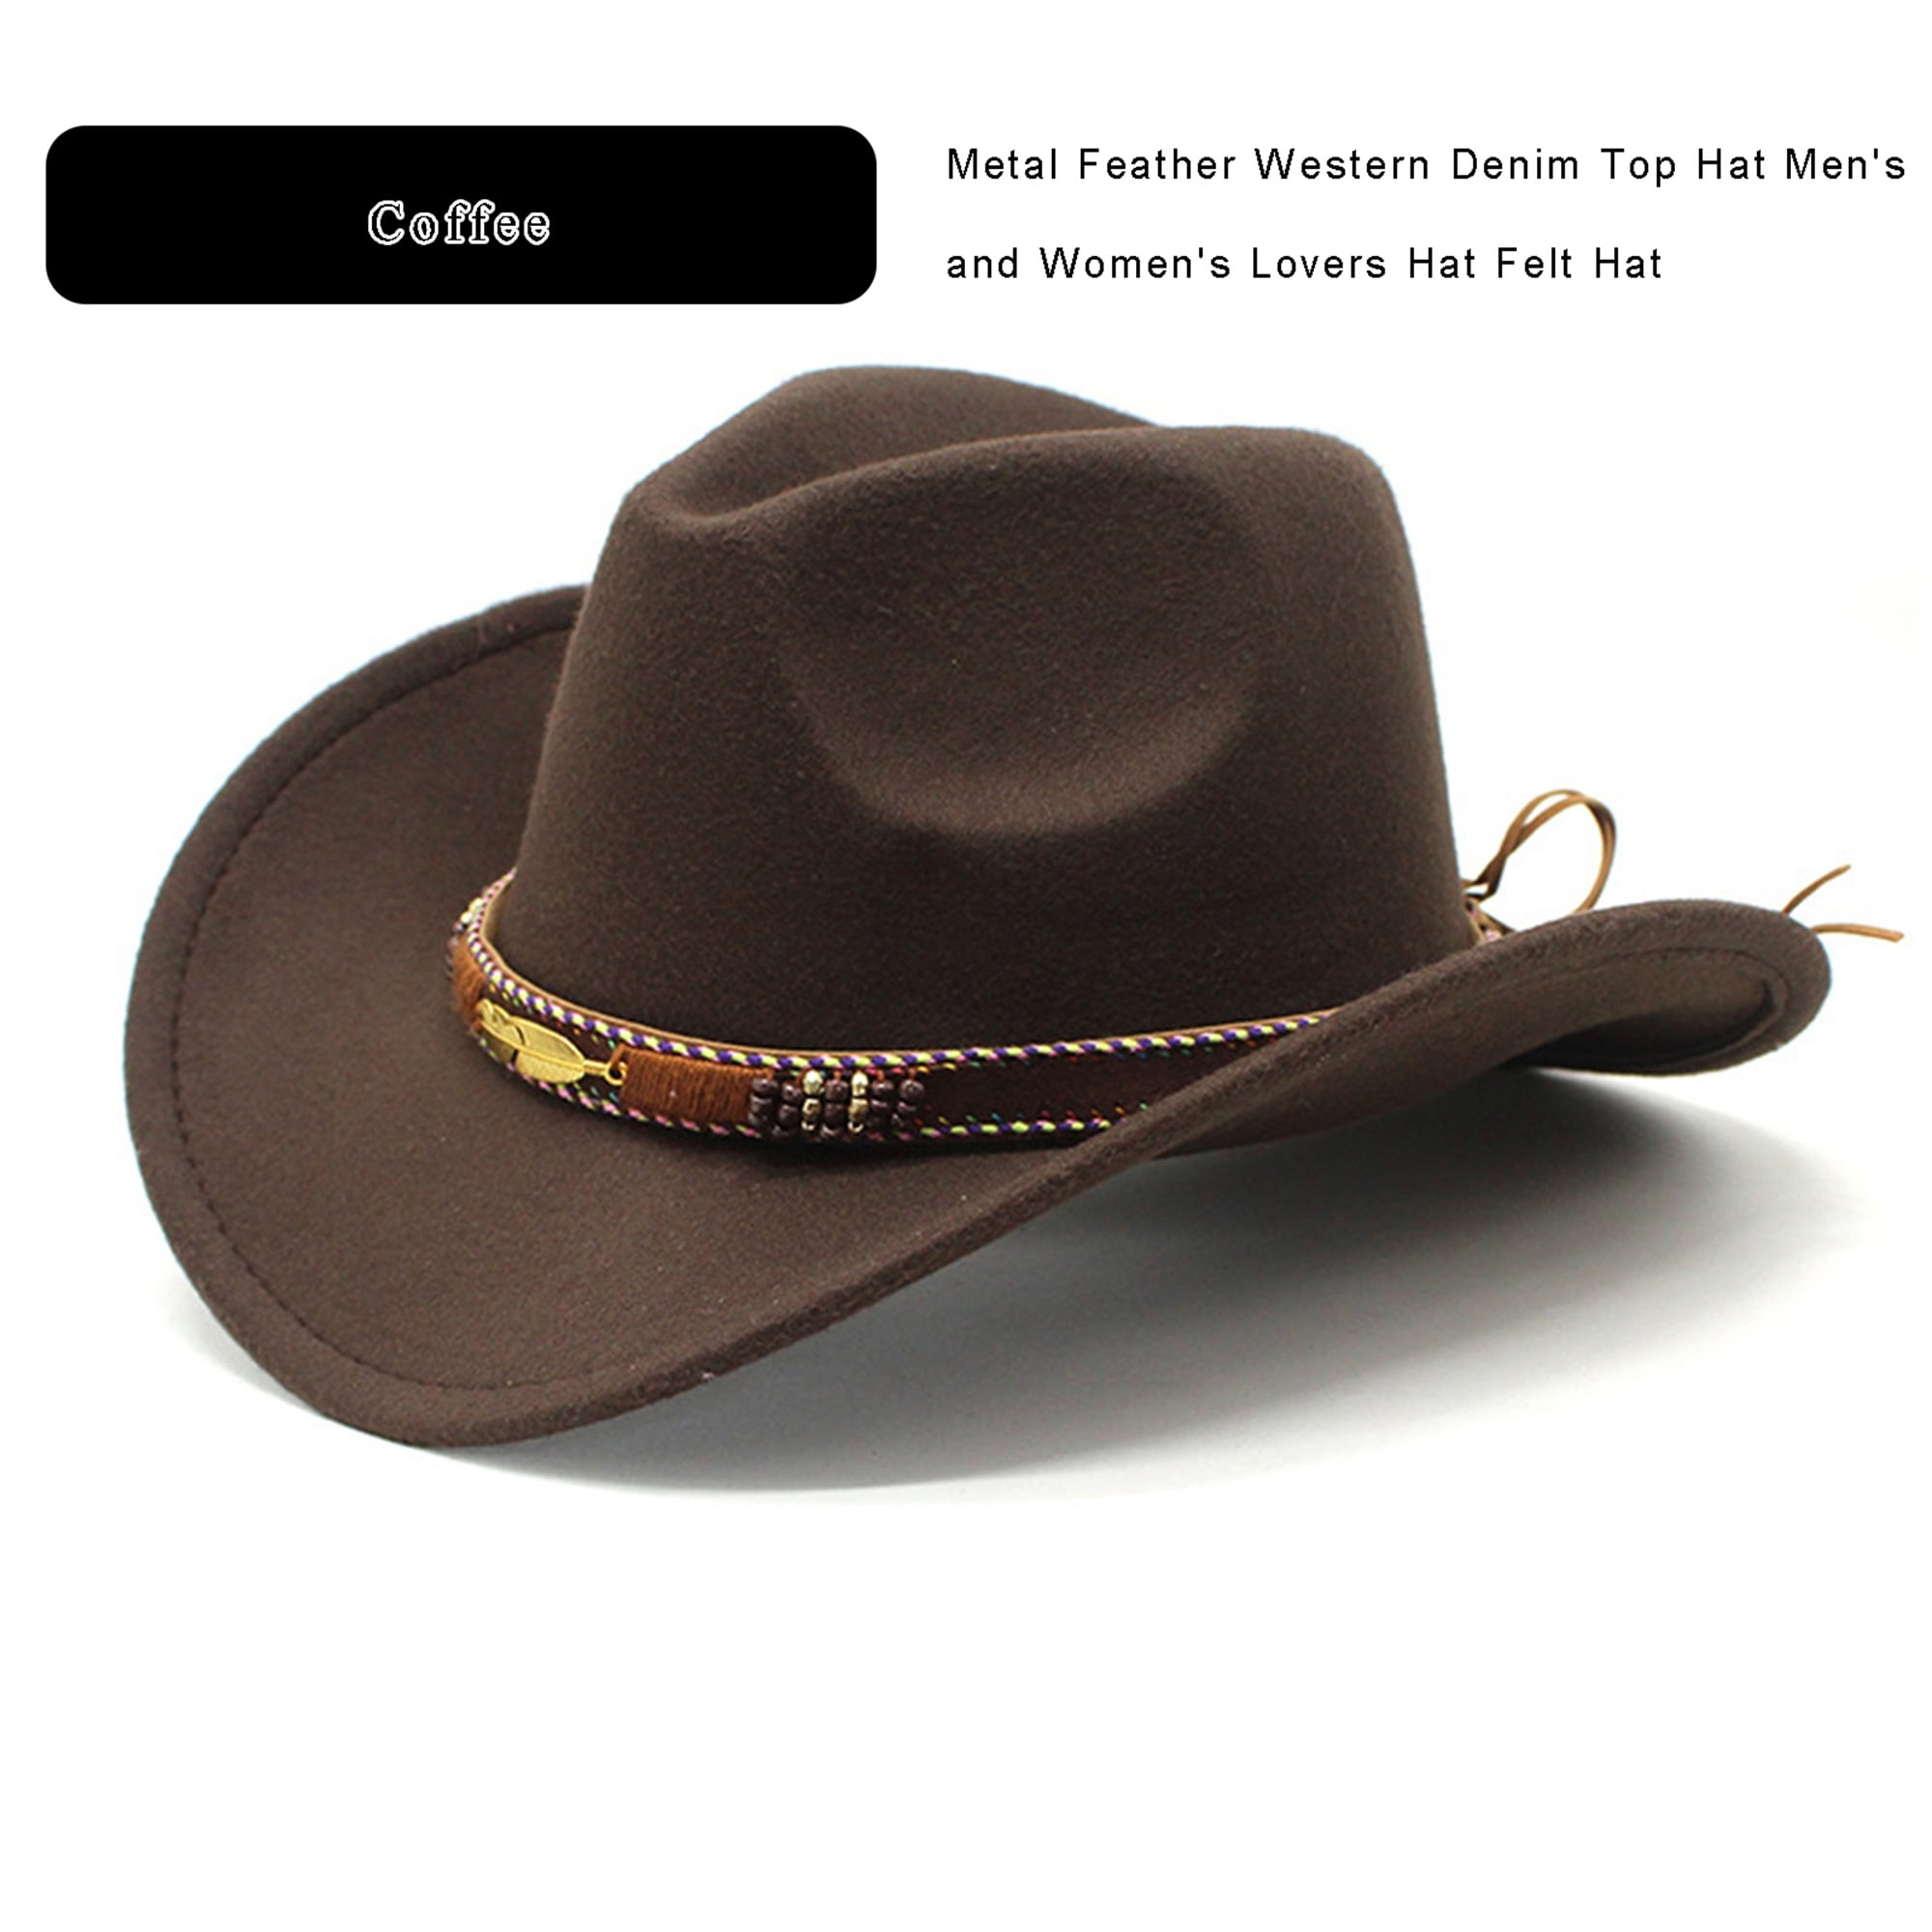 Youweixiong Women Men Western Cowboy Hat Retro Feather Fedora Hat for Hiking Rave Party Travel Costume Accessories, Adult Unisex, Size: One size